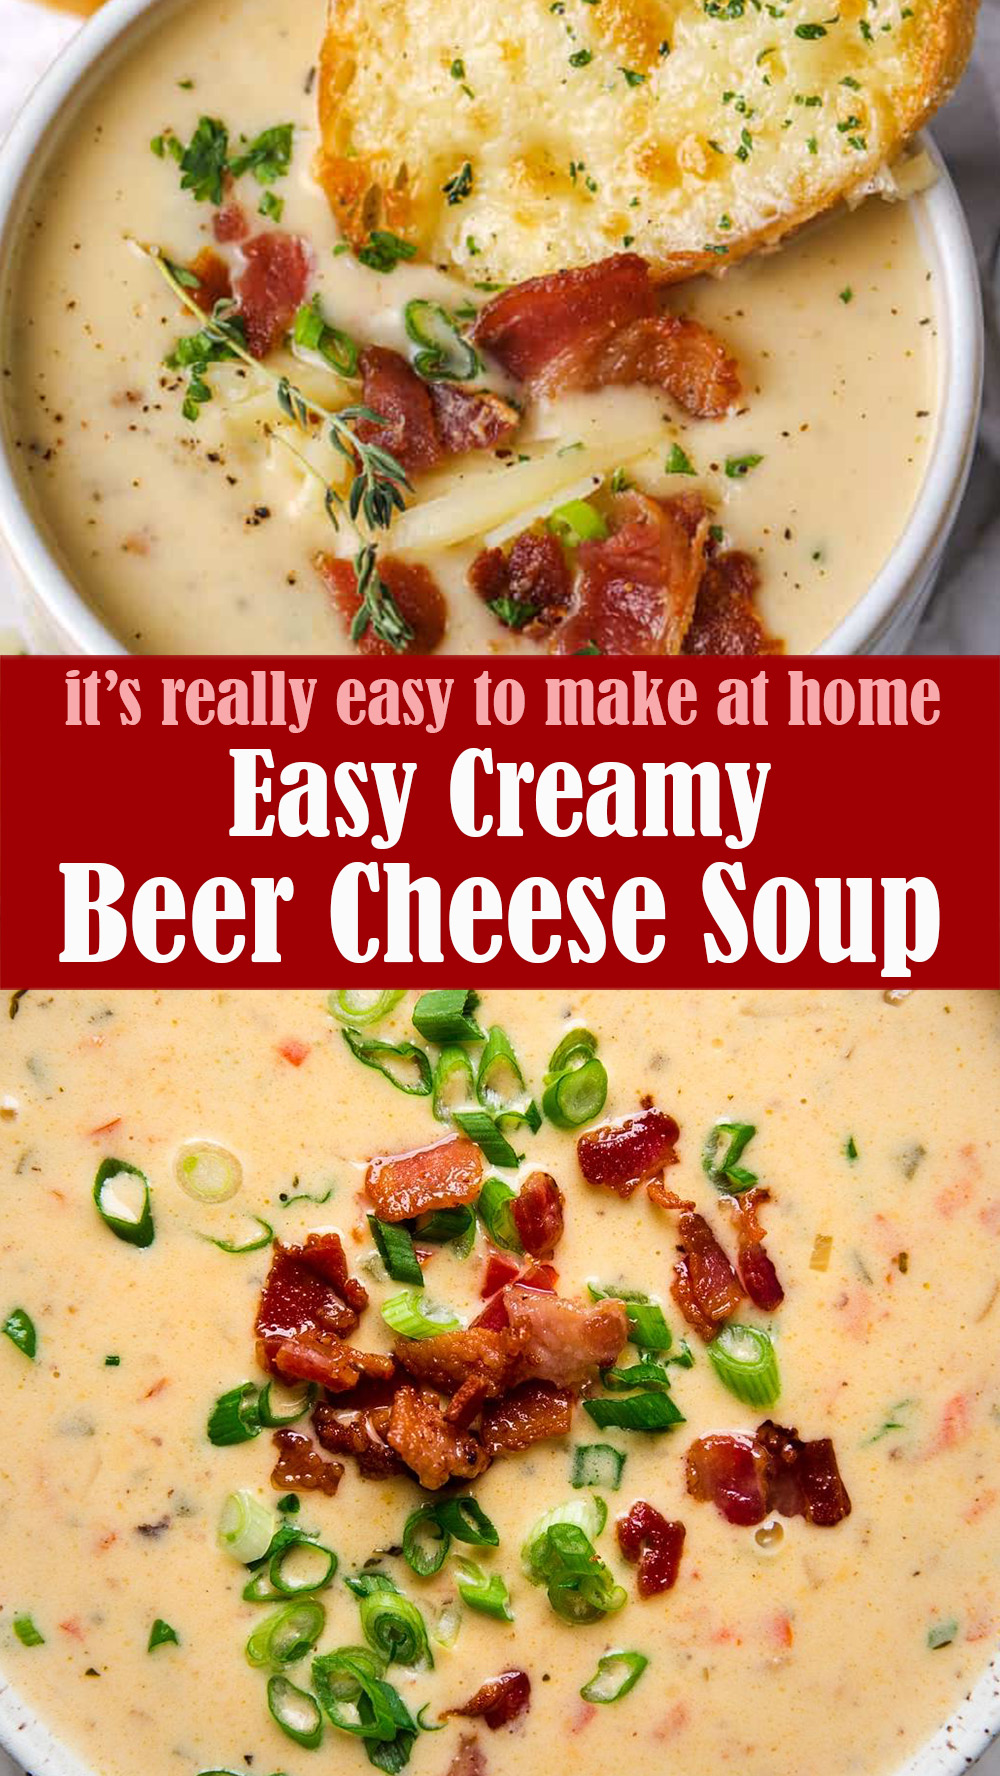 Easy Creamy Beer Cheese Soup Recipe